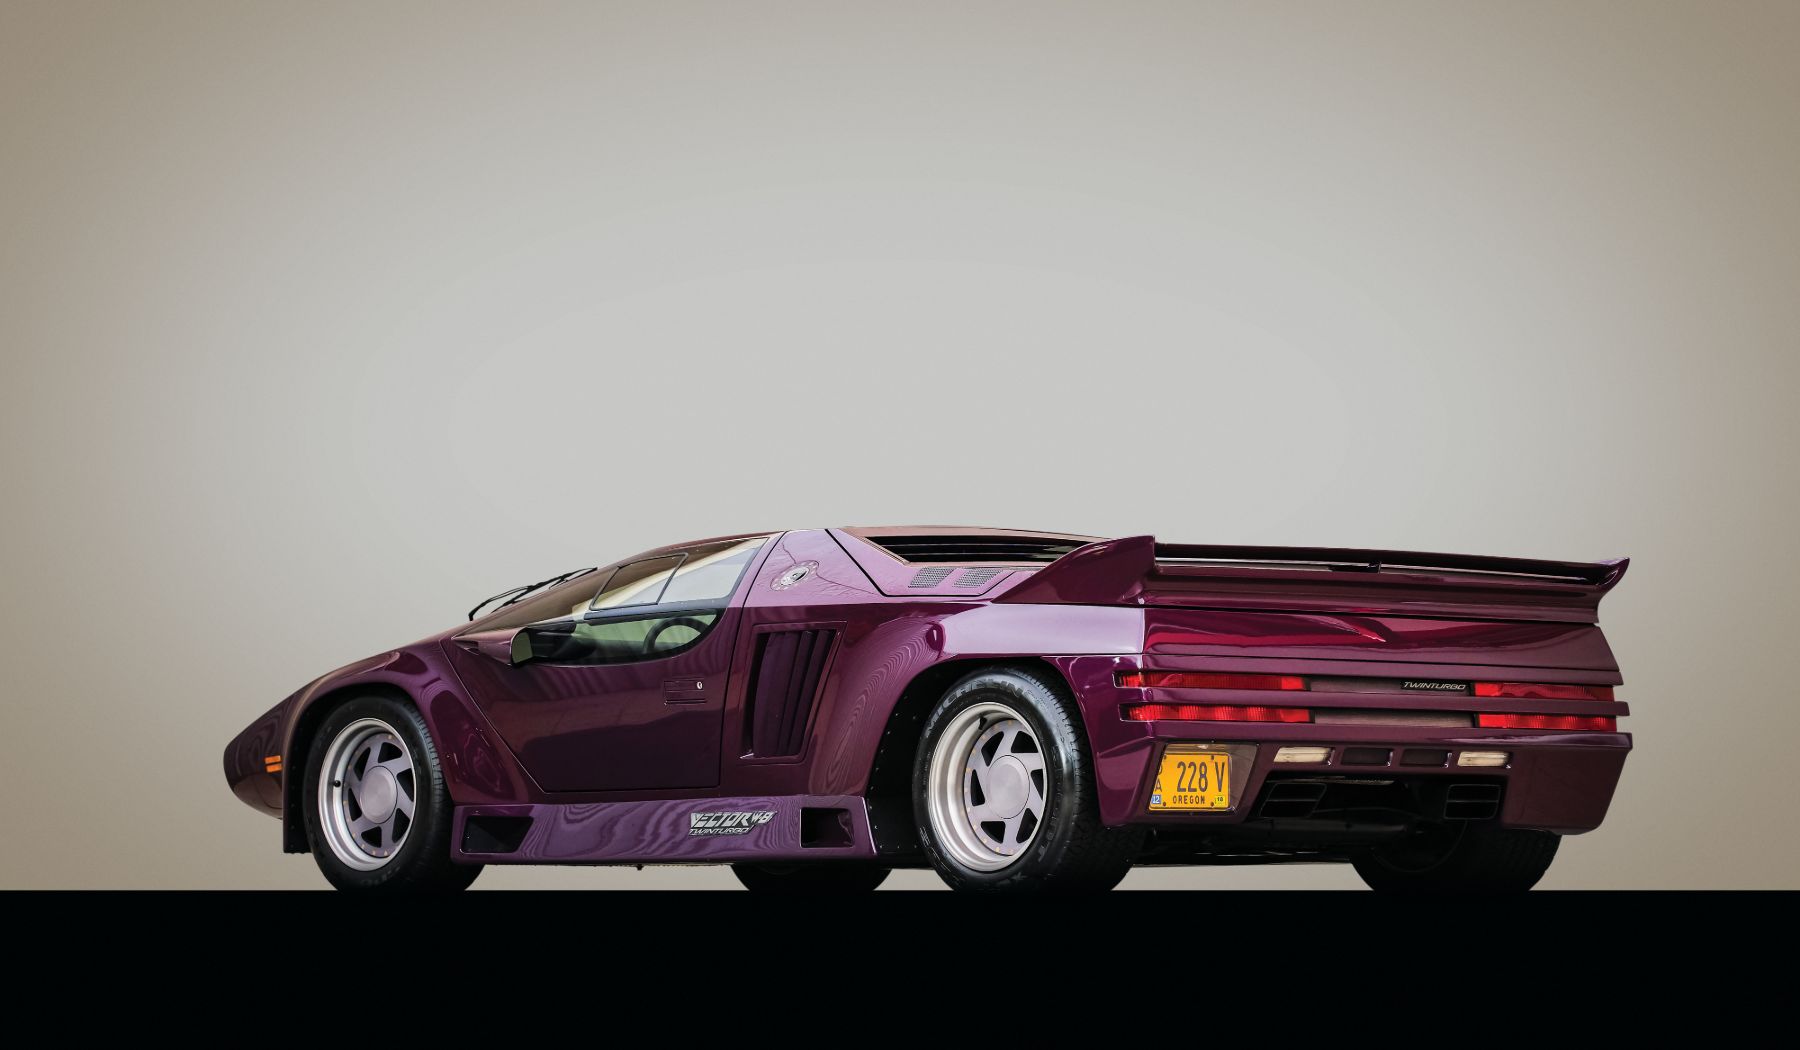 Image showing the rear-angled profile of a purple Vector W8 supercar.